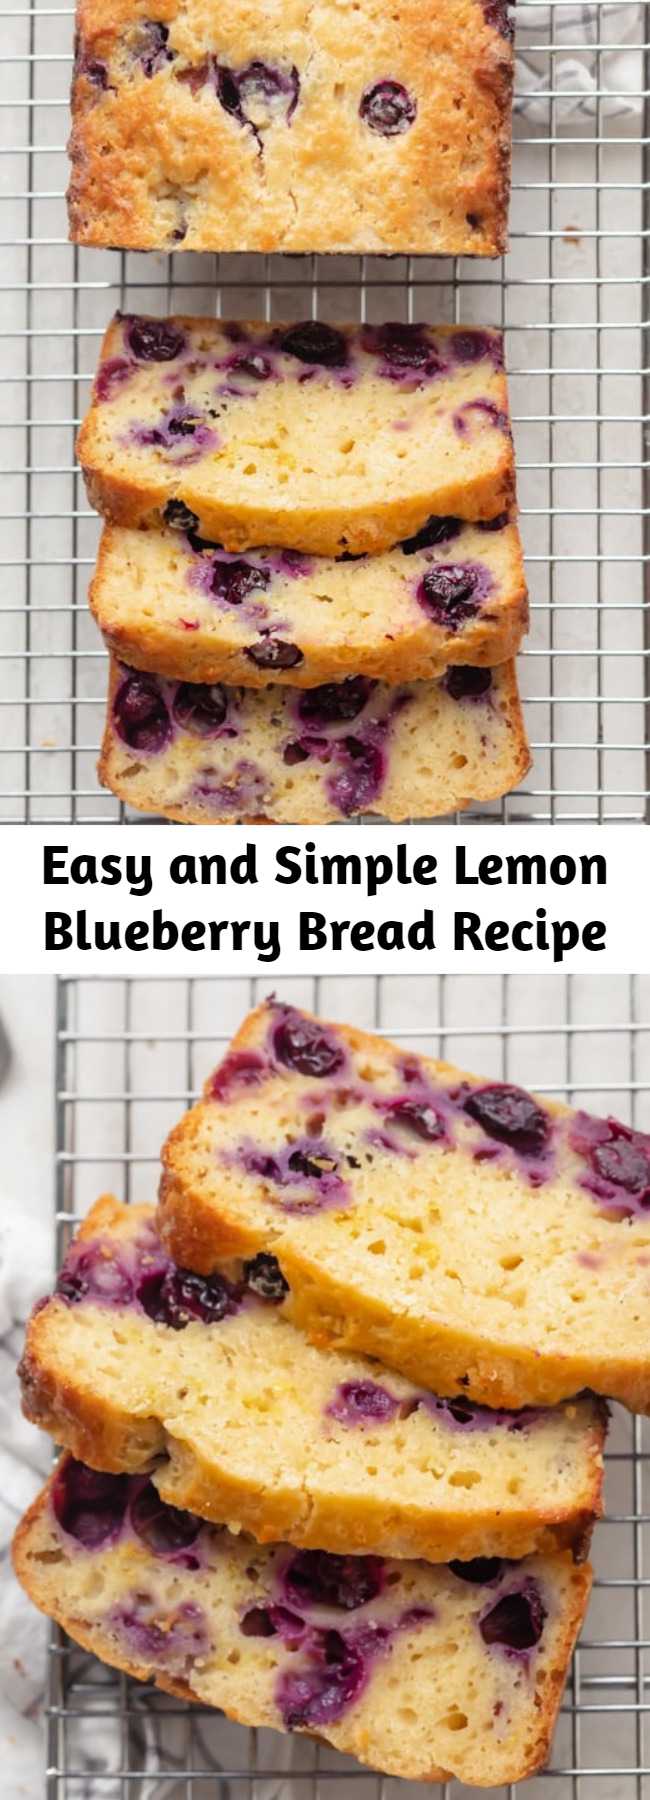 Easy and Simple Lemon Blueberry Bread Recipe - Welcome spring with this fresh and light Lemon Blueberry Bread. It's easy to make with simple ingredients, and comes out moist, fluffy & packed with flavor. This is a soft and moist quick bread that is packed with flavor, and super simple to make. #easybaking ##springbaking #springrecipes